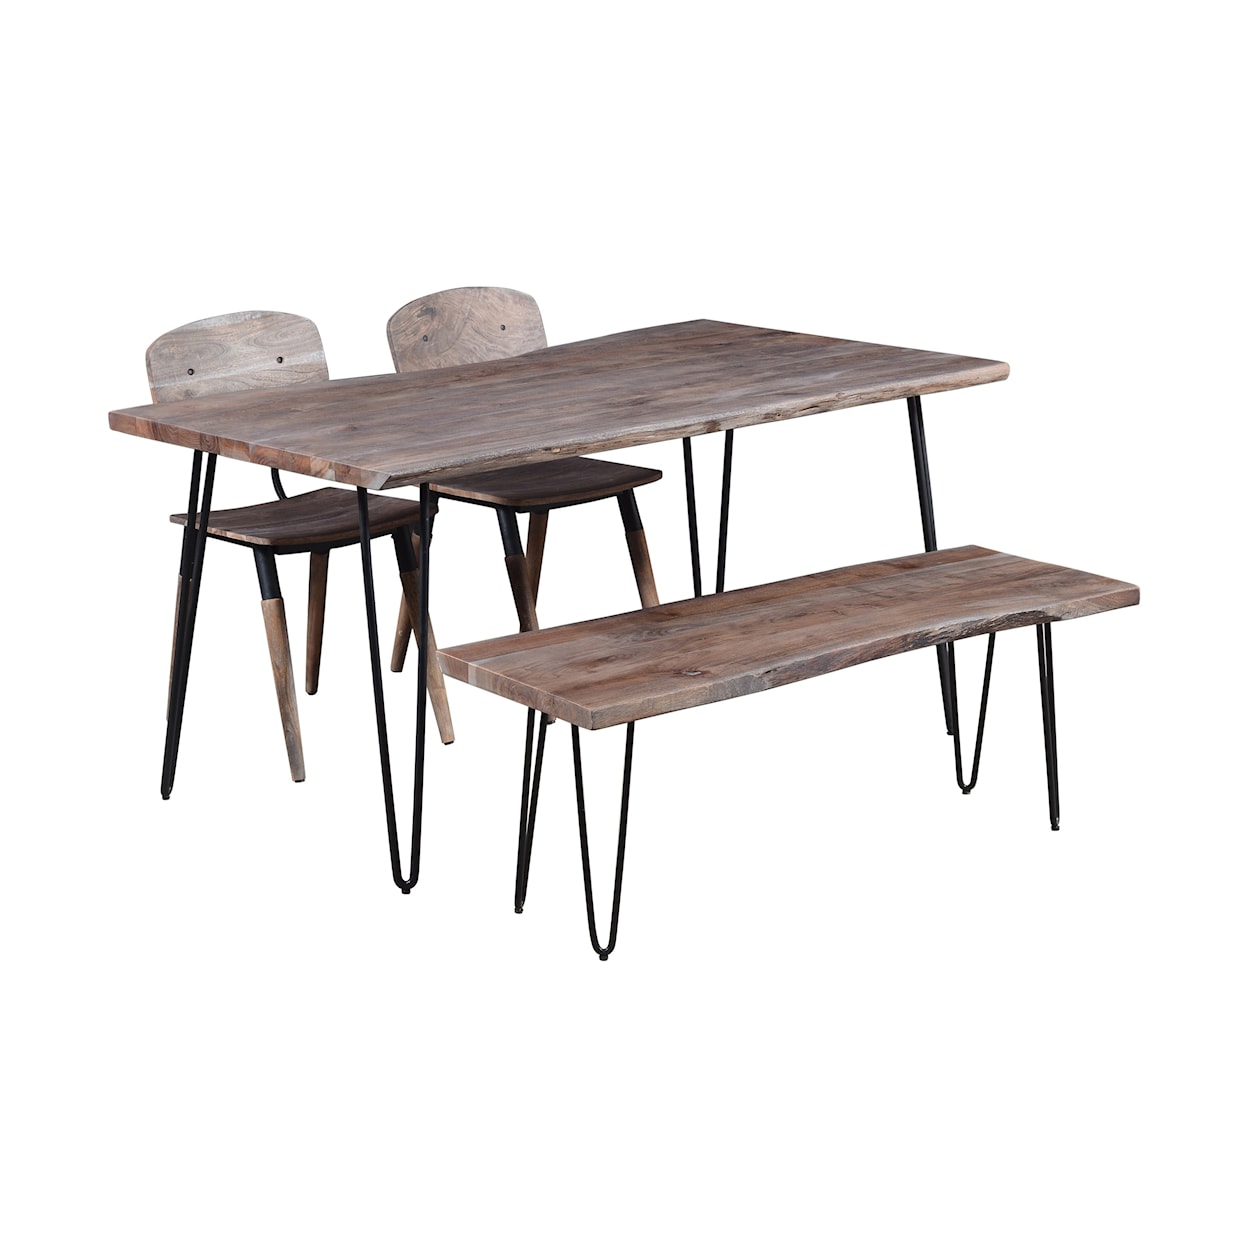 VFM Signature Nature's Edge 60" Dining Table with 2 Chairs and Bench